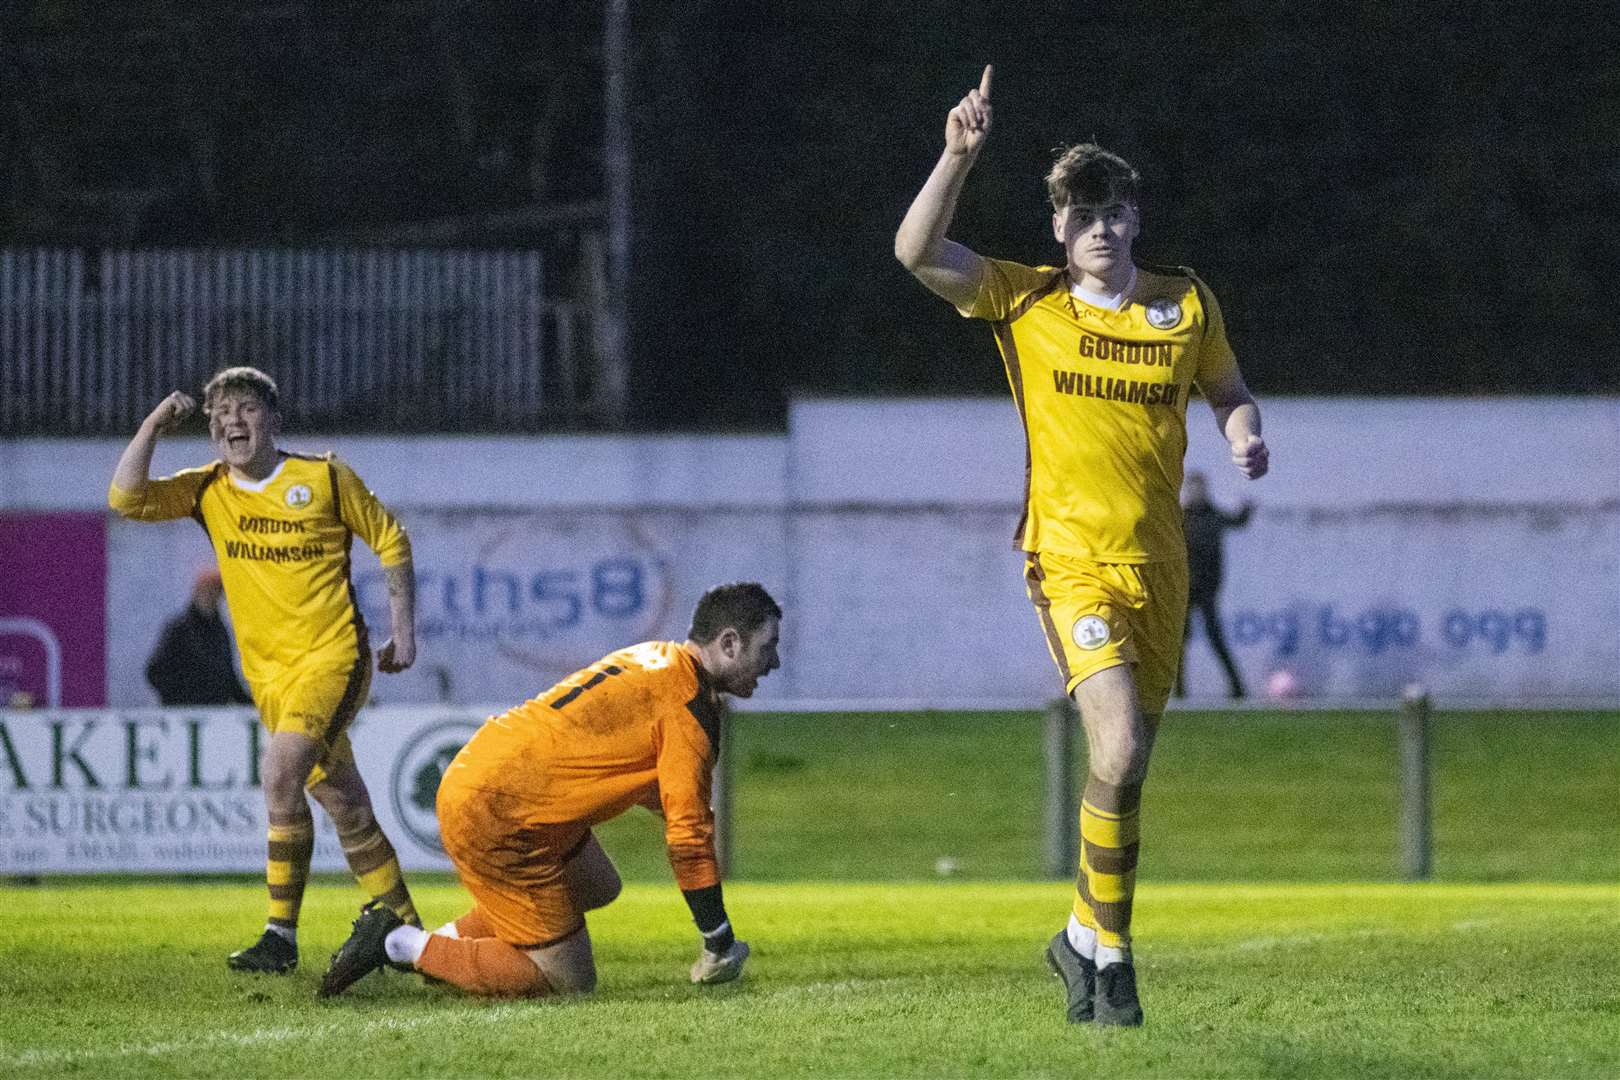 Forres Mechanics forward Ben Barron wheels away to celebrate his second and Forres' seventh goal of the afternoon...Forres Mechanics FC (8) vs Strathspey Thistle FC (1) - Highland Football League 22/23 - Mosset Park, Forres 07/01/23...Picture: Daniel Forsyth..